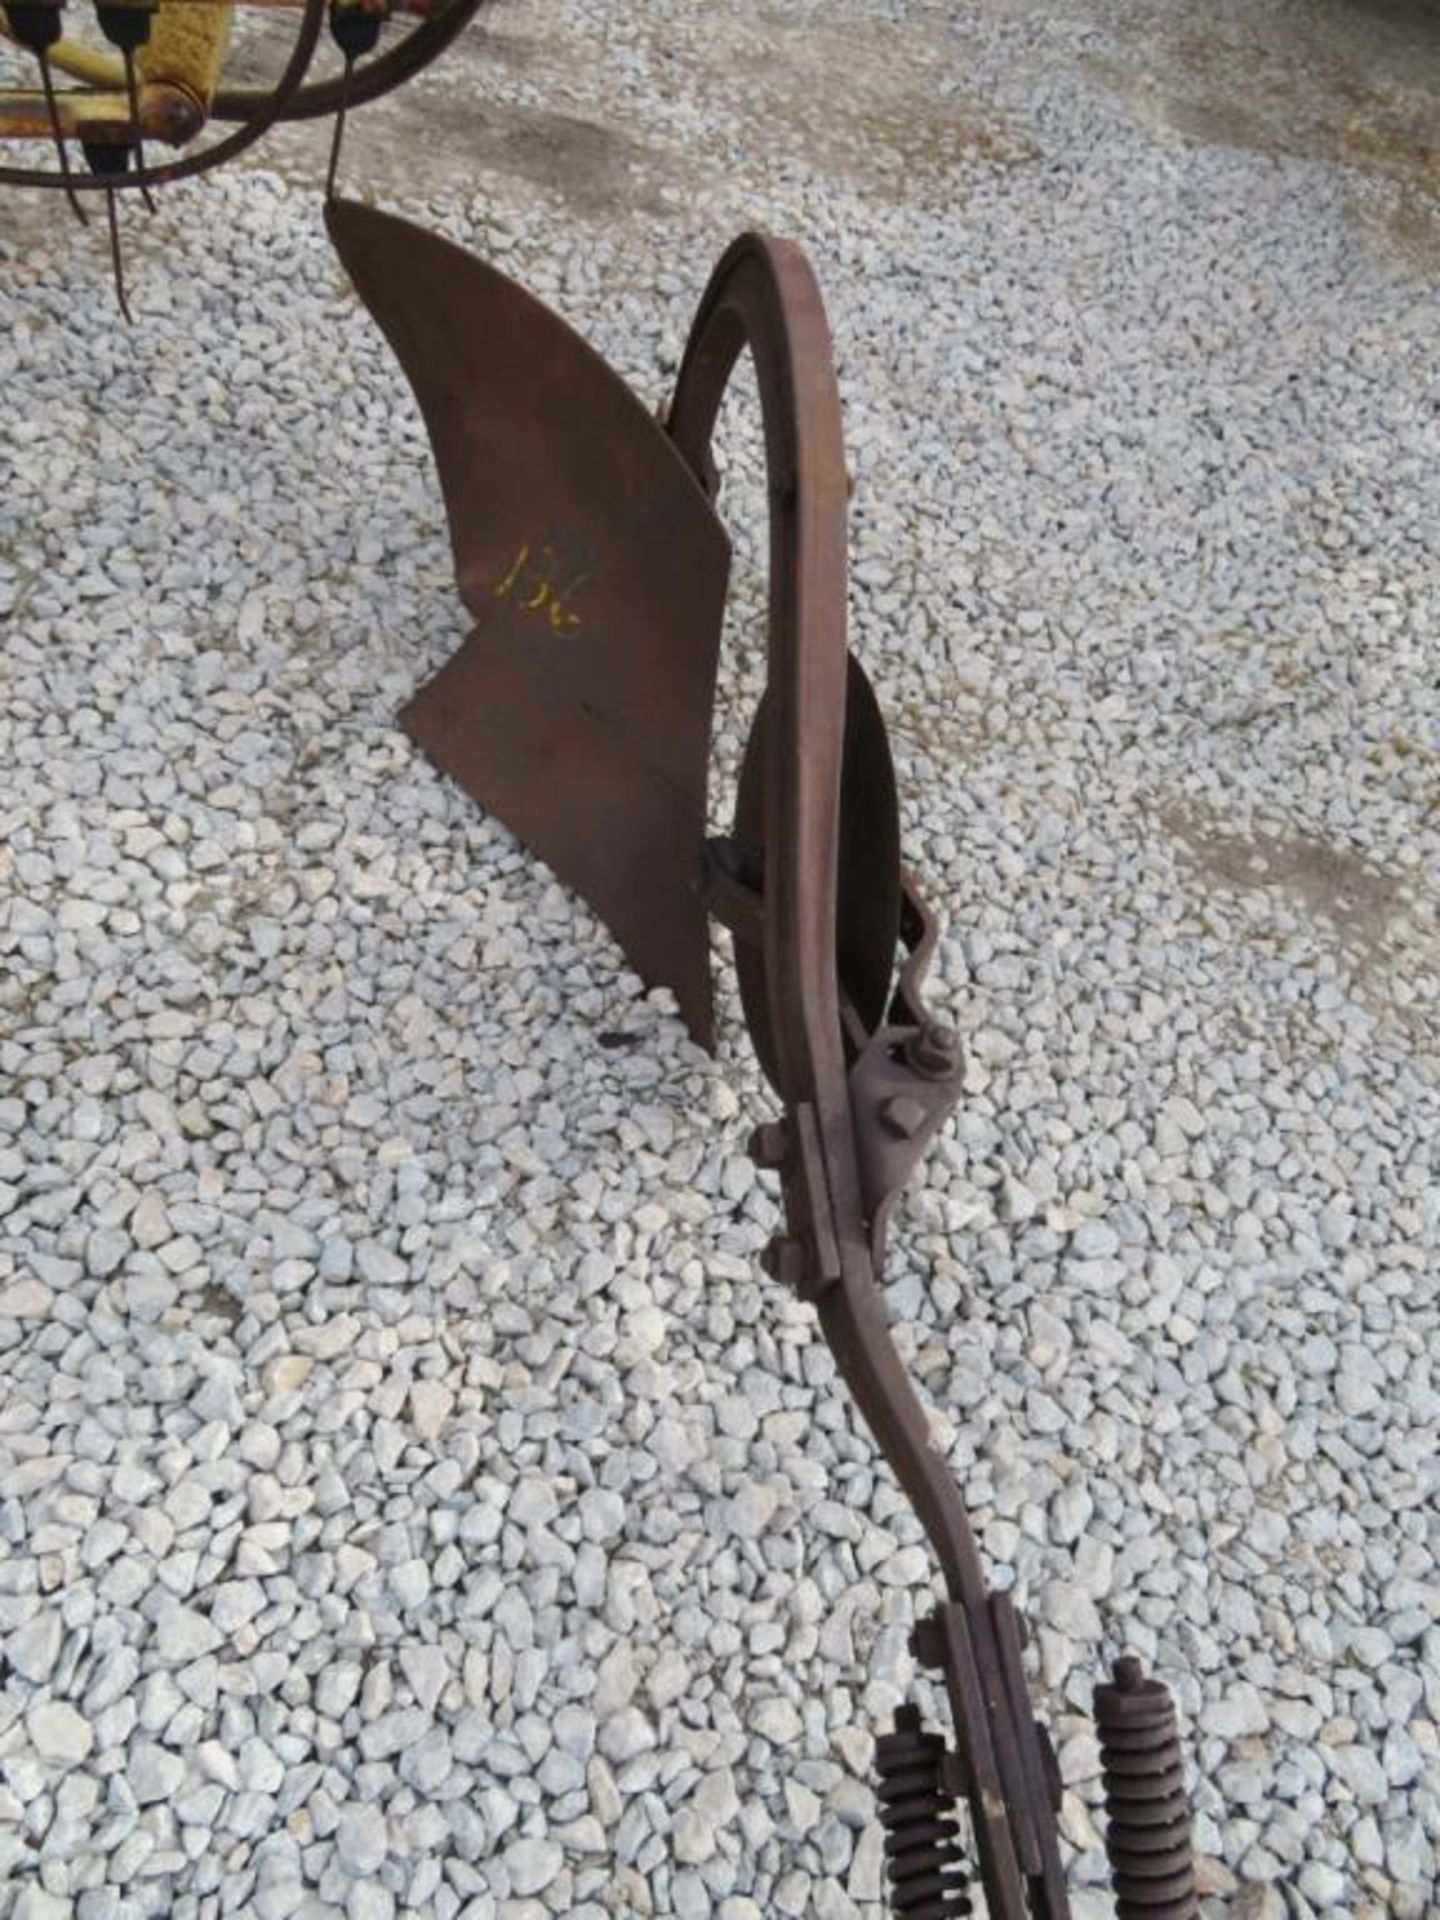 1 bottom plow for C IH tractor